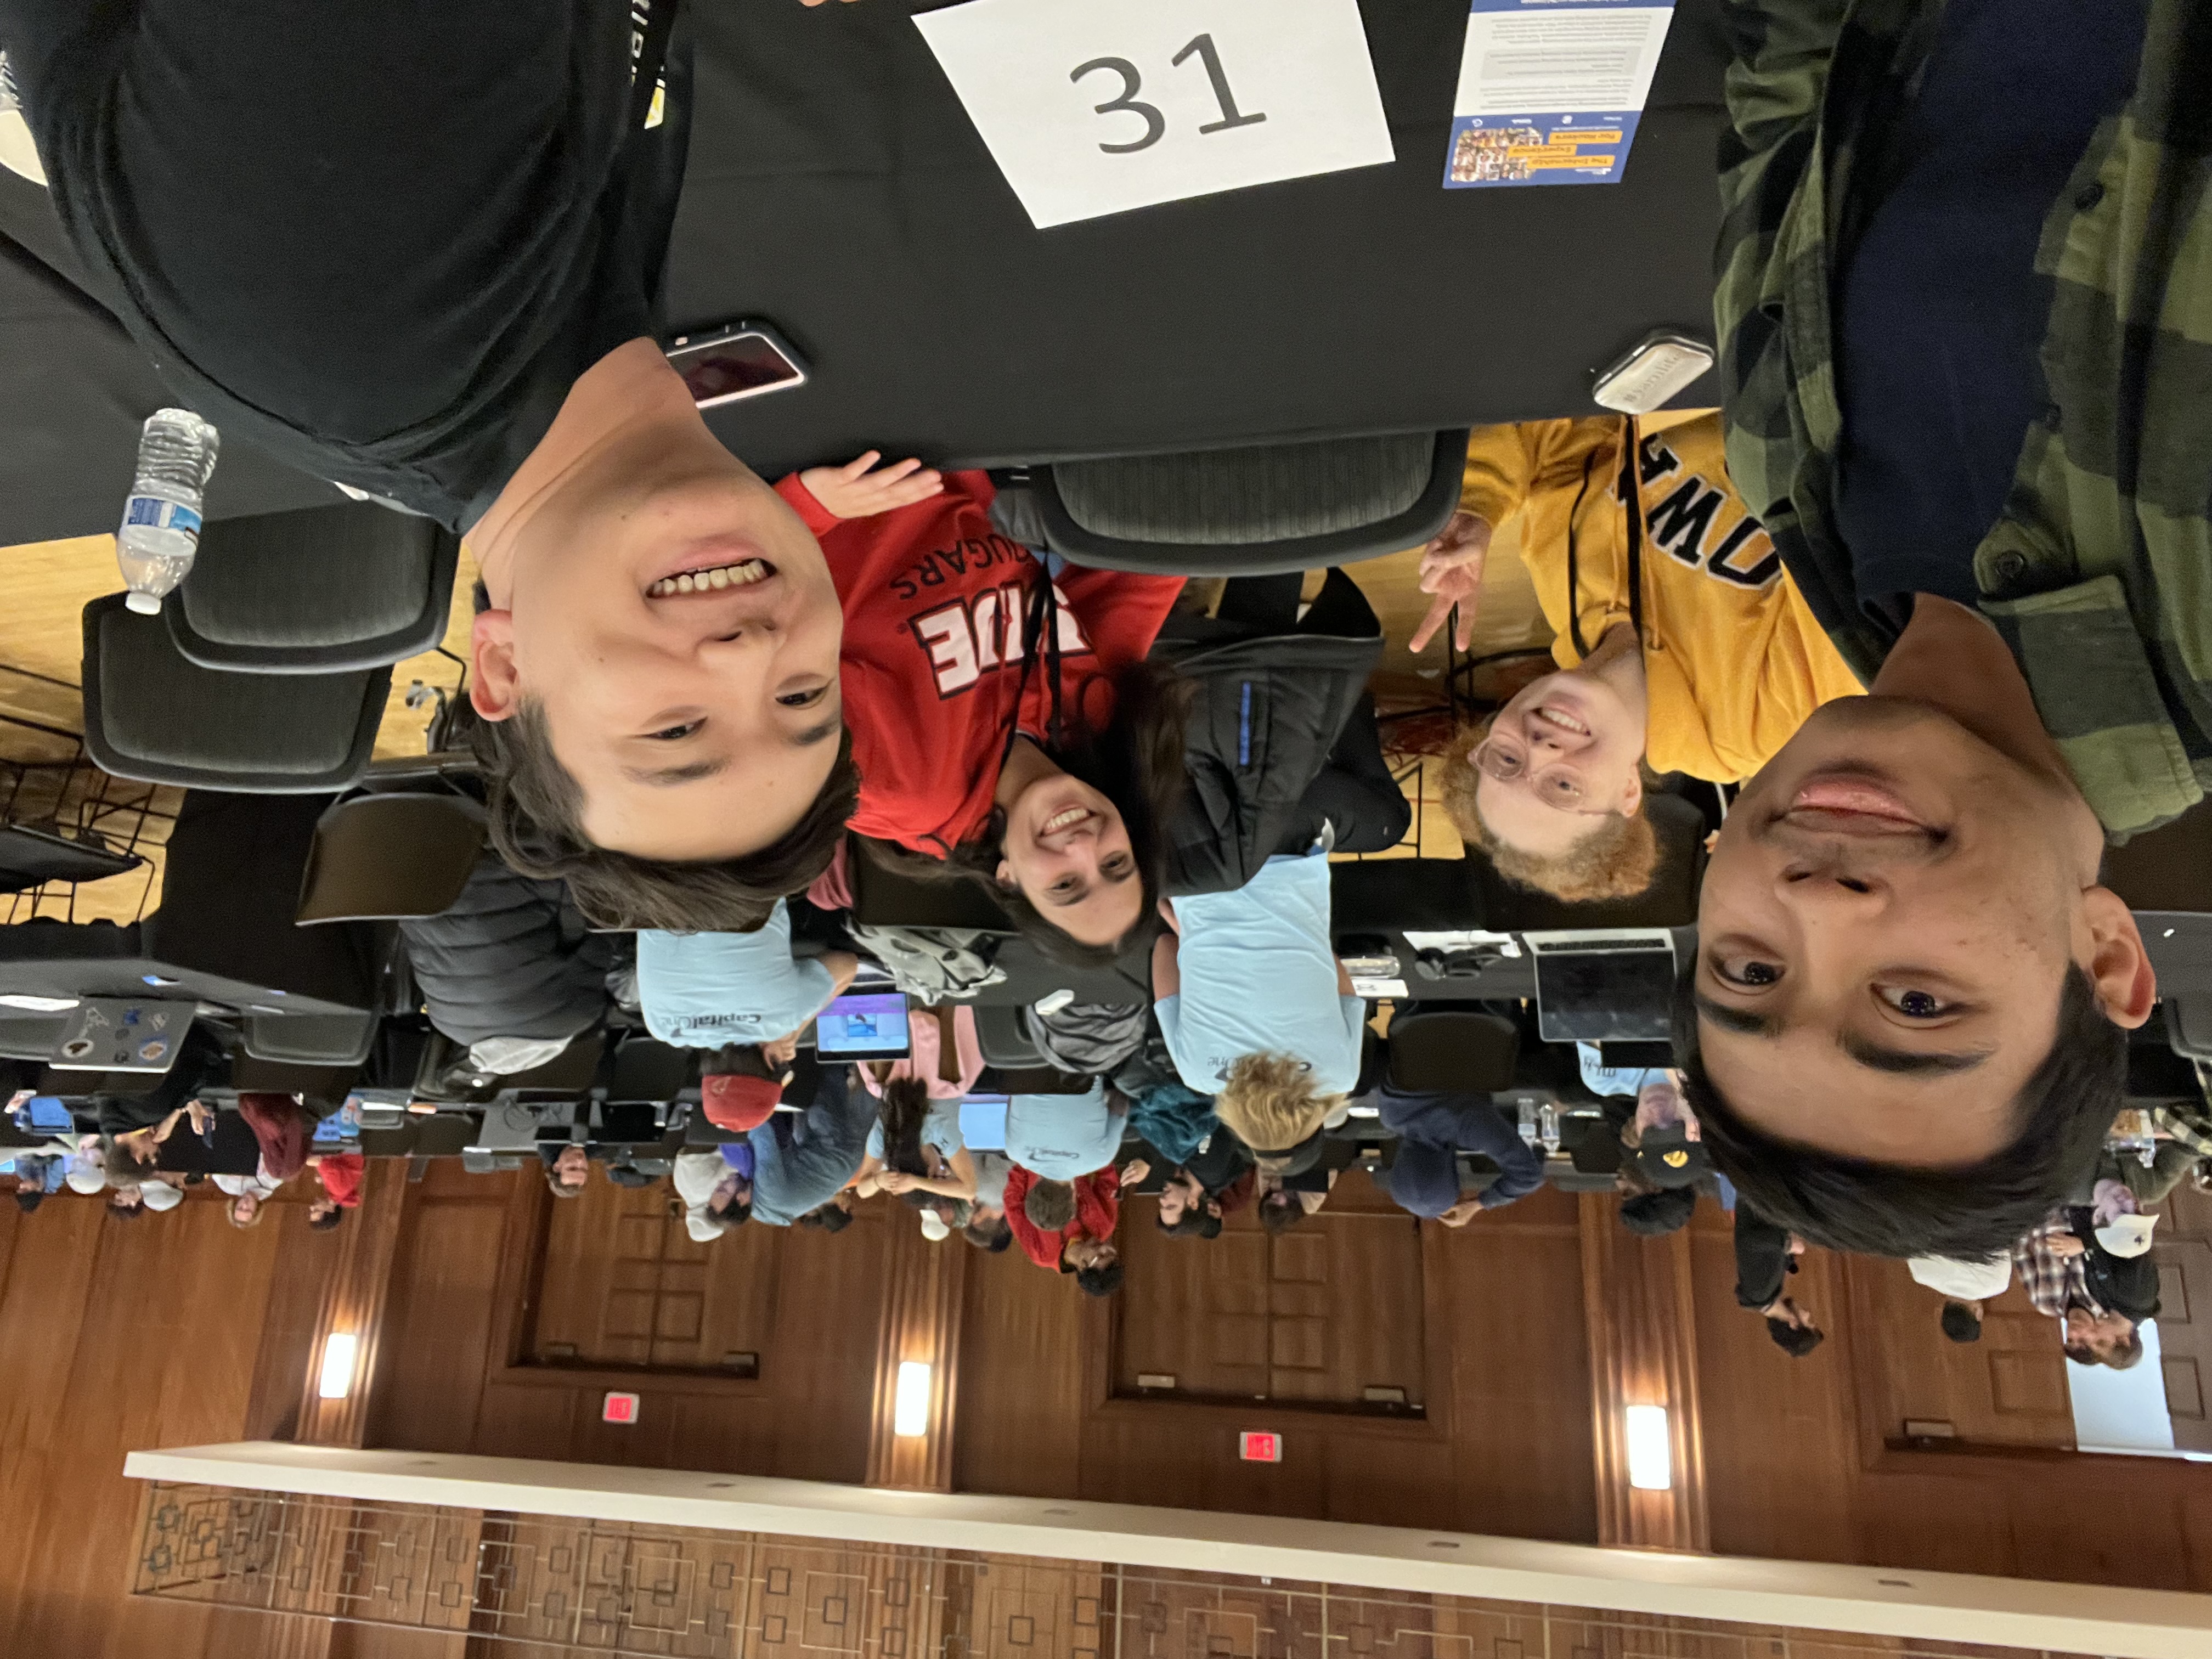 The four of us at the University of Iowa Hackathon! From left to right: Danial, Francesca, Geo, and me. 